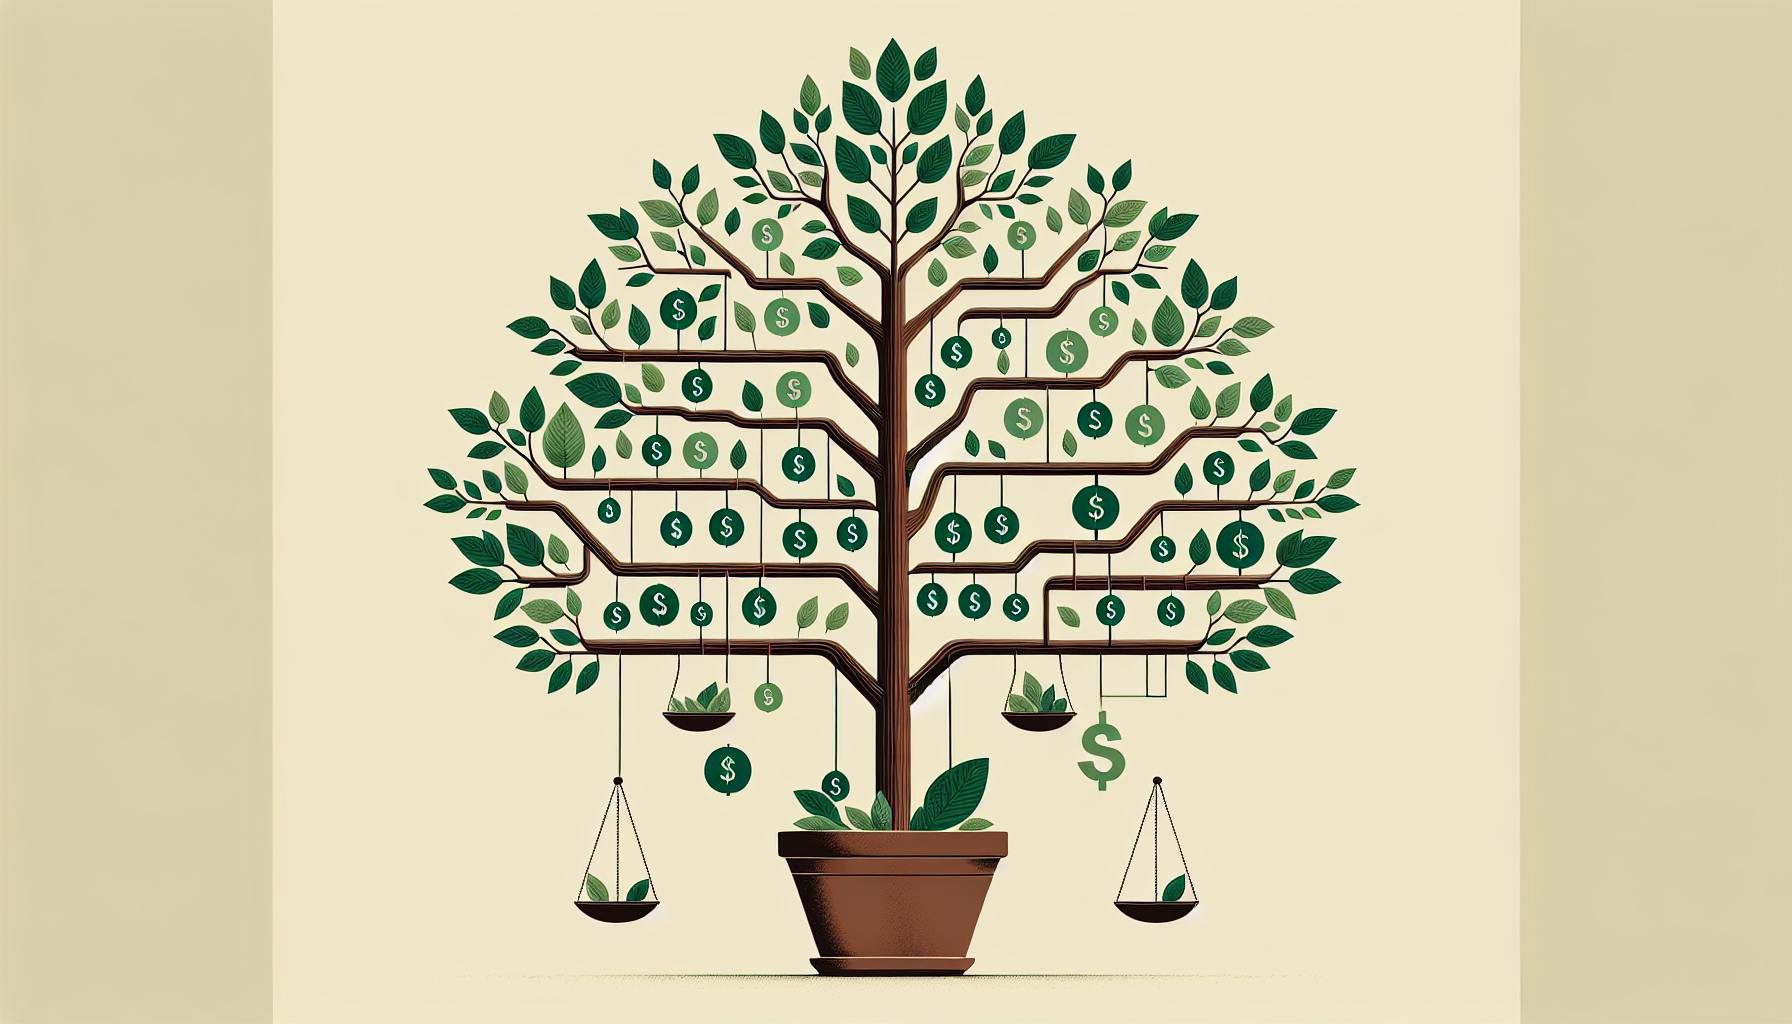 Family Law Paralegal Salary in the US: Financial Insights into Domestic Legal Affairs